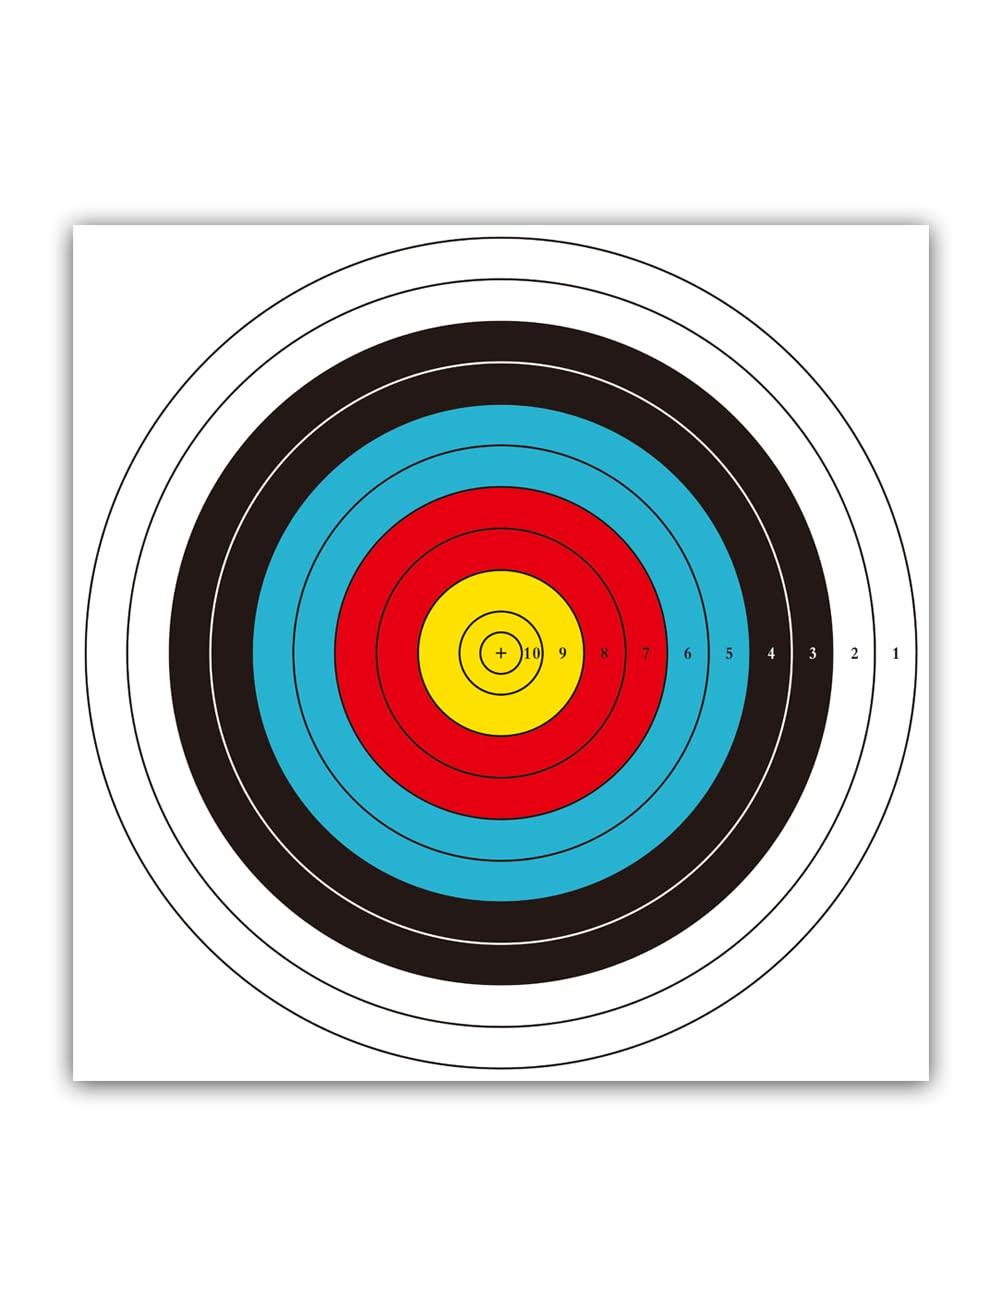 Started archery about two days ago, practicing everyday for like 5 hours  ever since I got my recurve. Got a bullseye first try today! : r/Archery